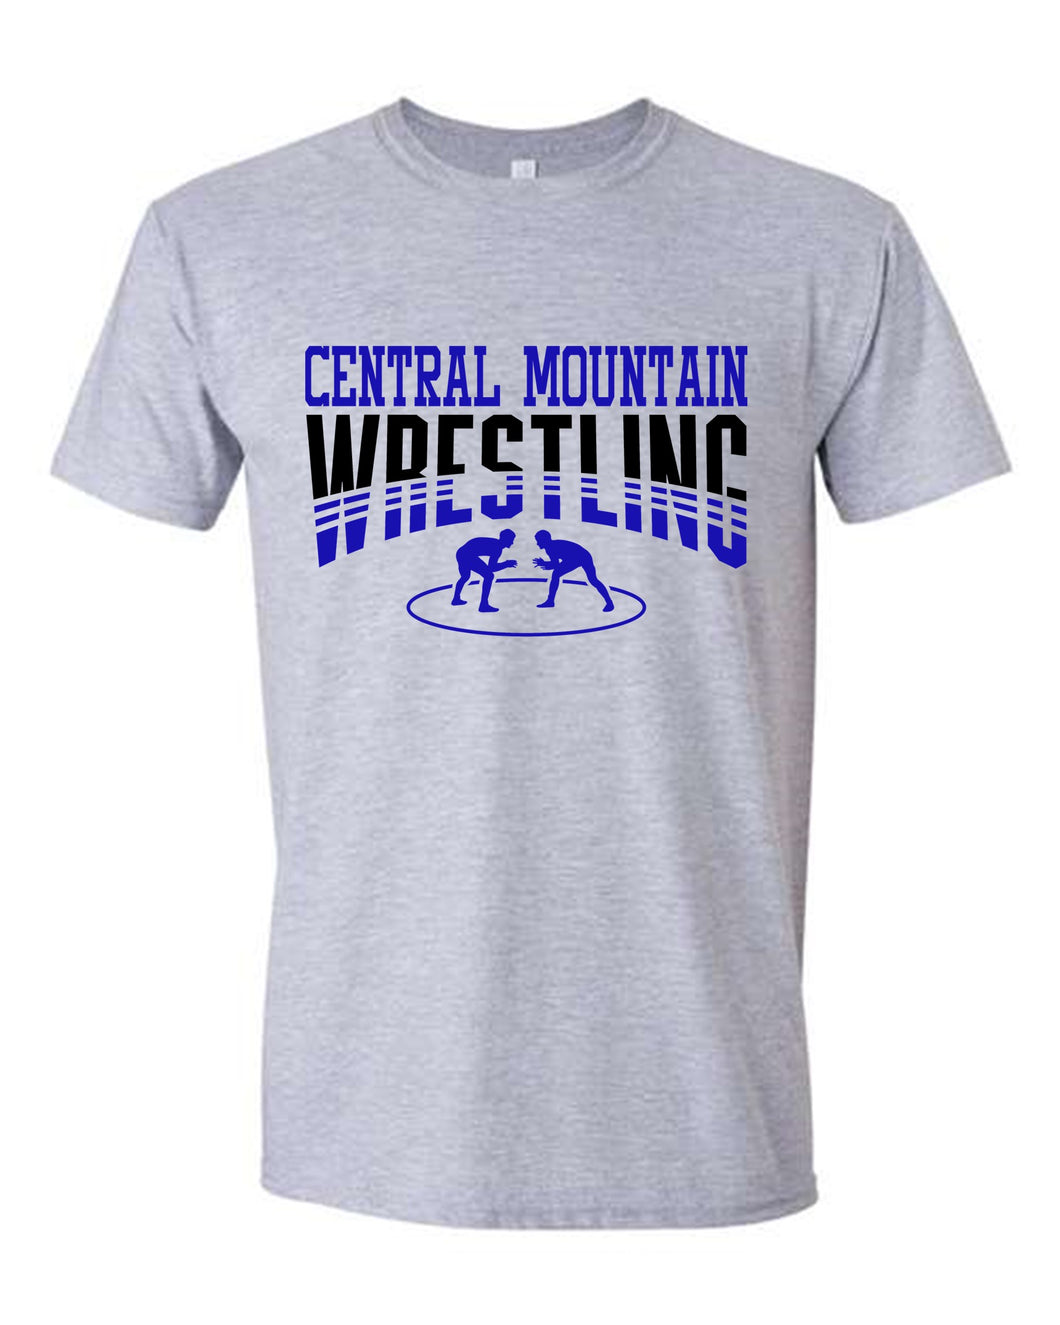 Central Mountain Wildcats Wrestling Style 3 - Click for Additional Styles (Youth and Adult)